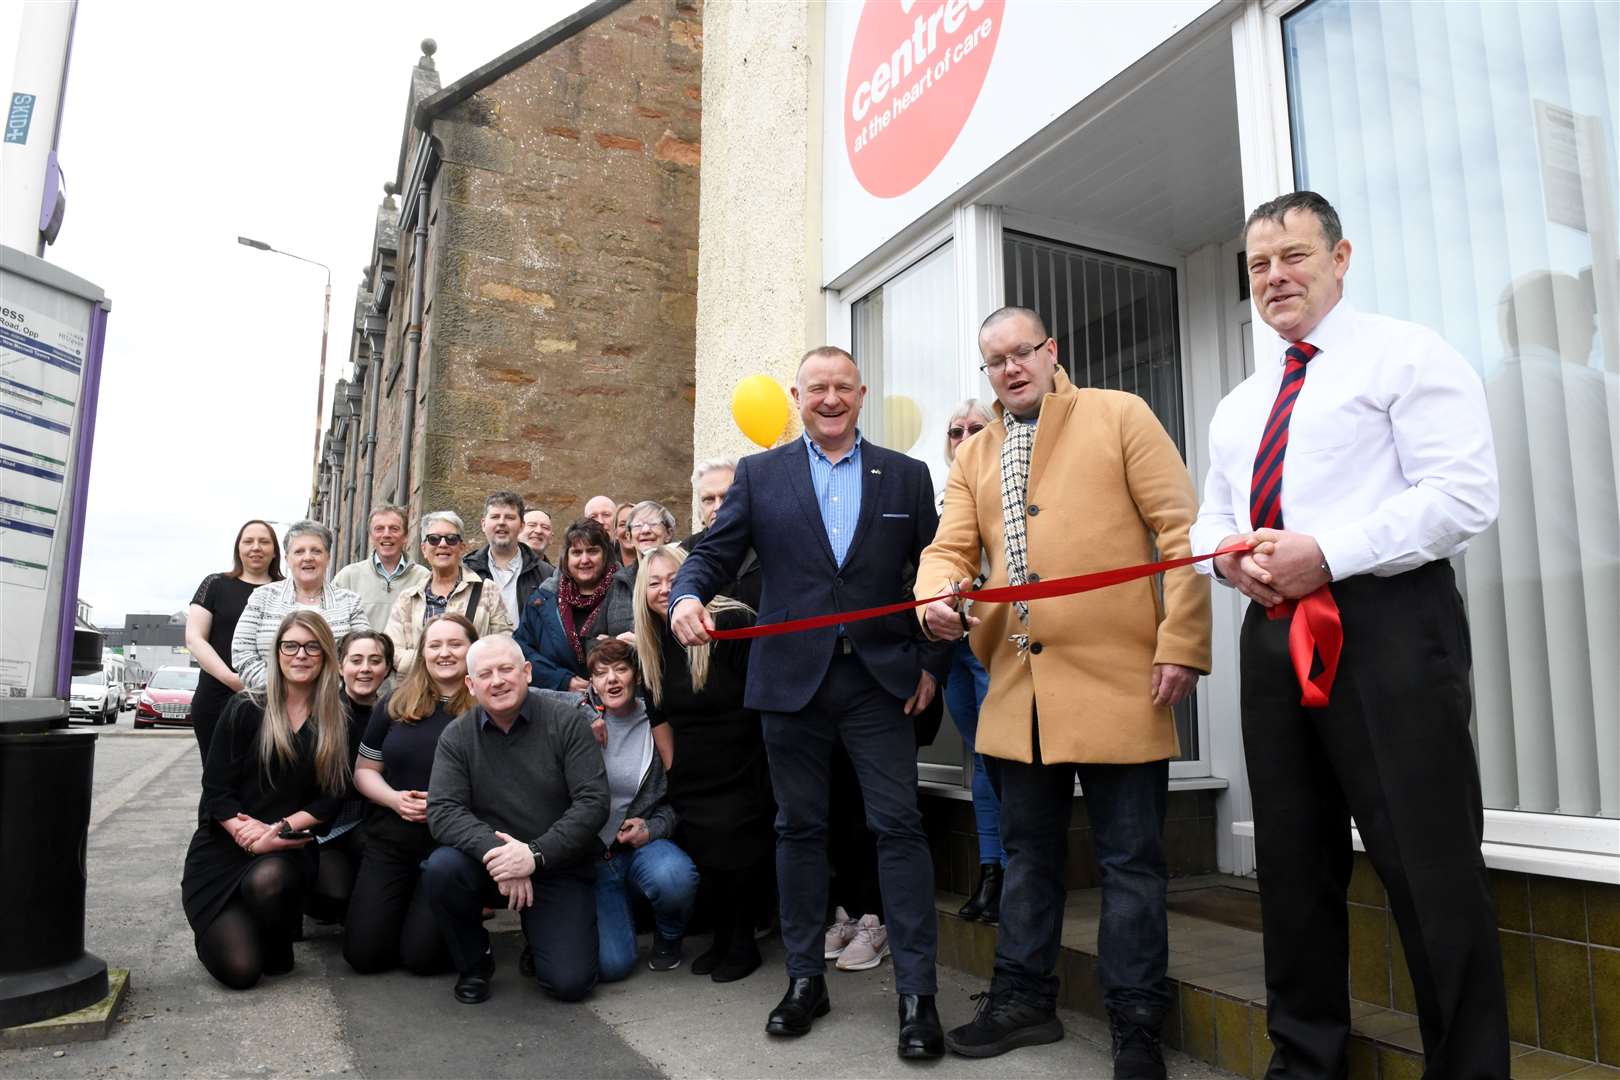 Inverness MP Drew Hendry, service user Paul Alexander Mackay and Centred chief executive David Brookfield cut the ribbon. Picture: James Mackenzie.